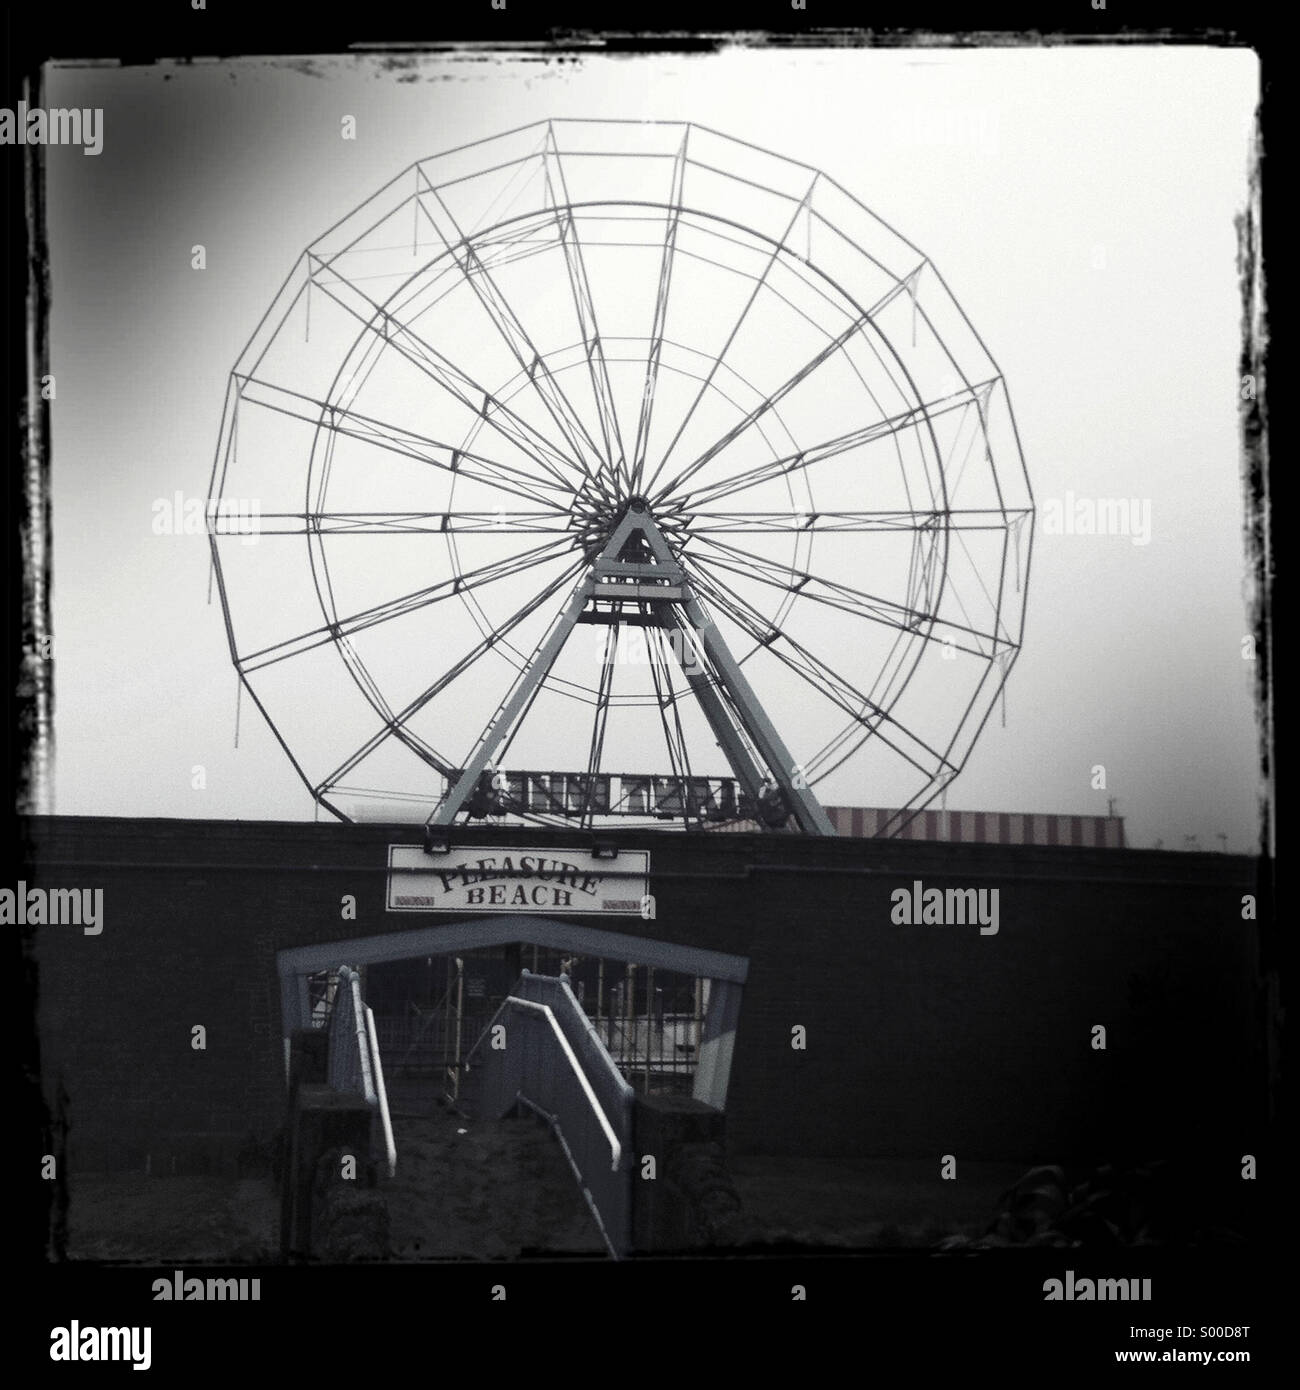 The Ferris wheels at Skegness, England on a misty day. Stock Photo